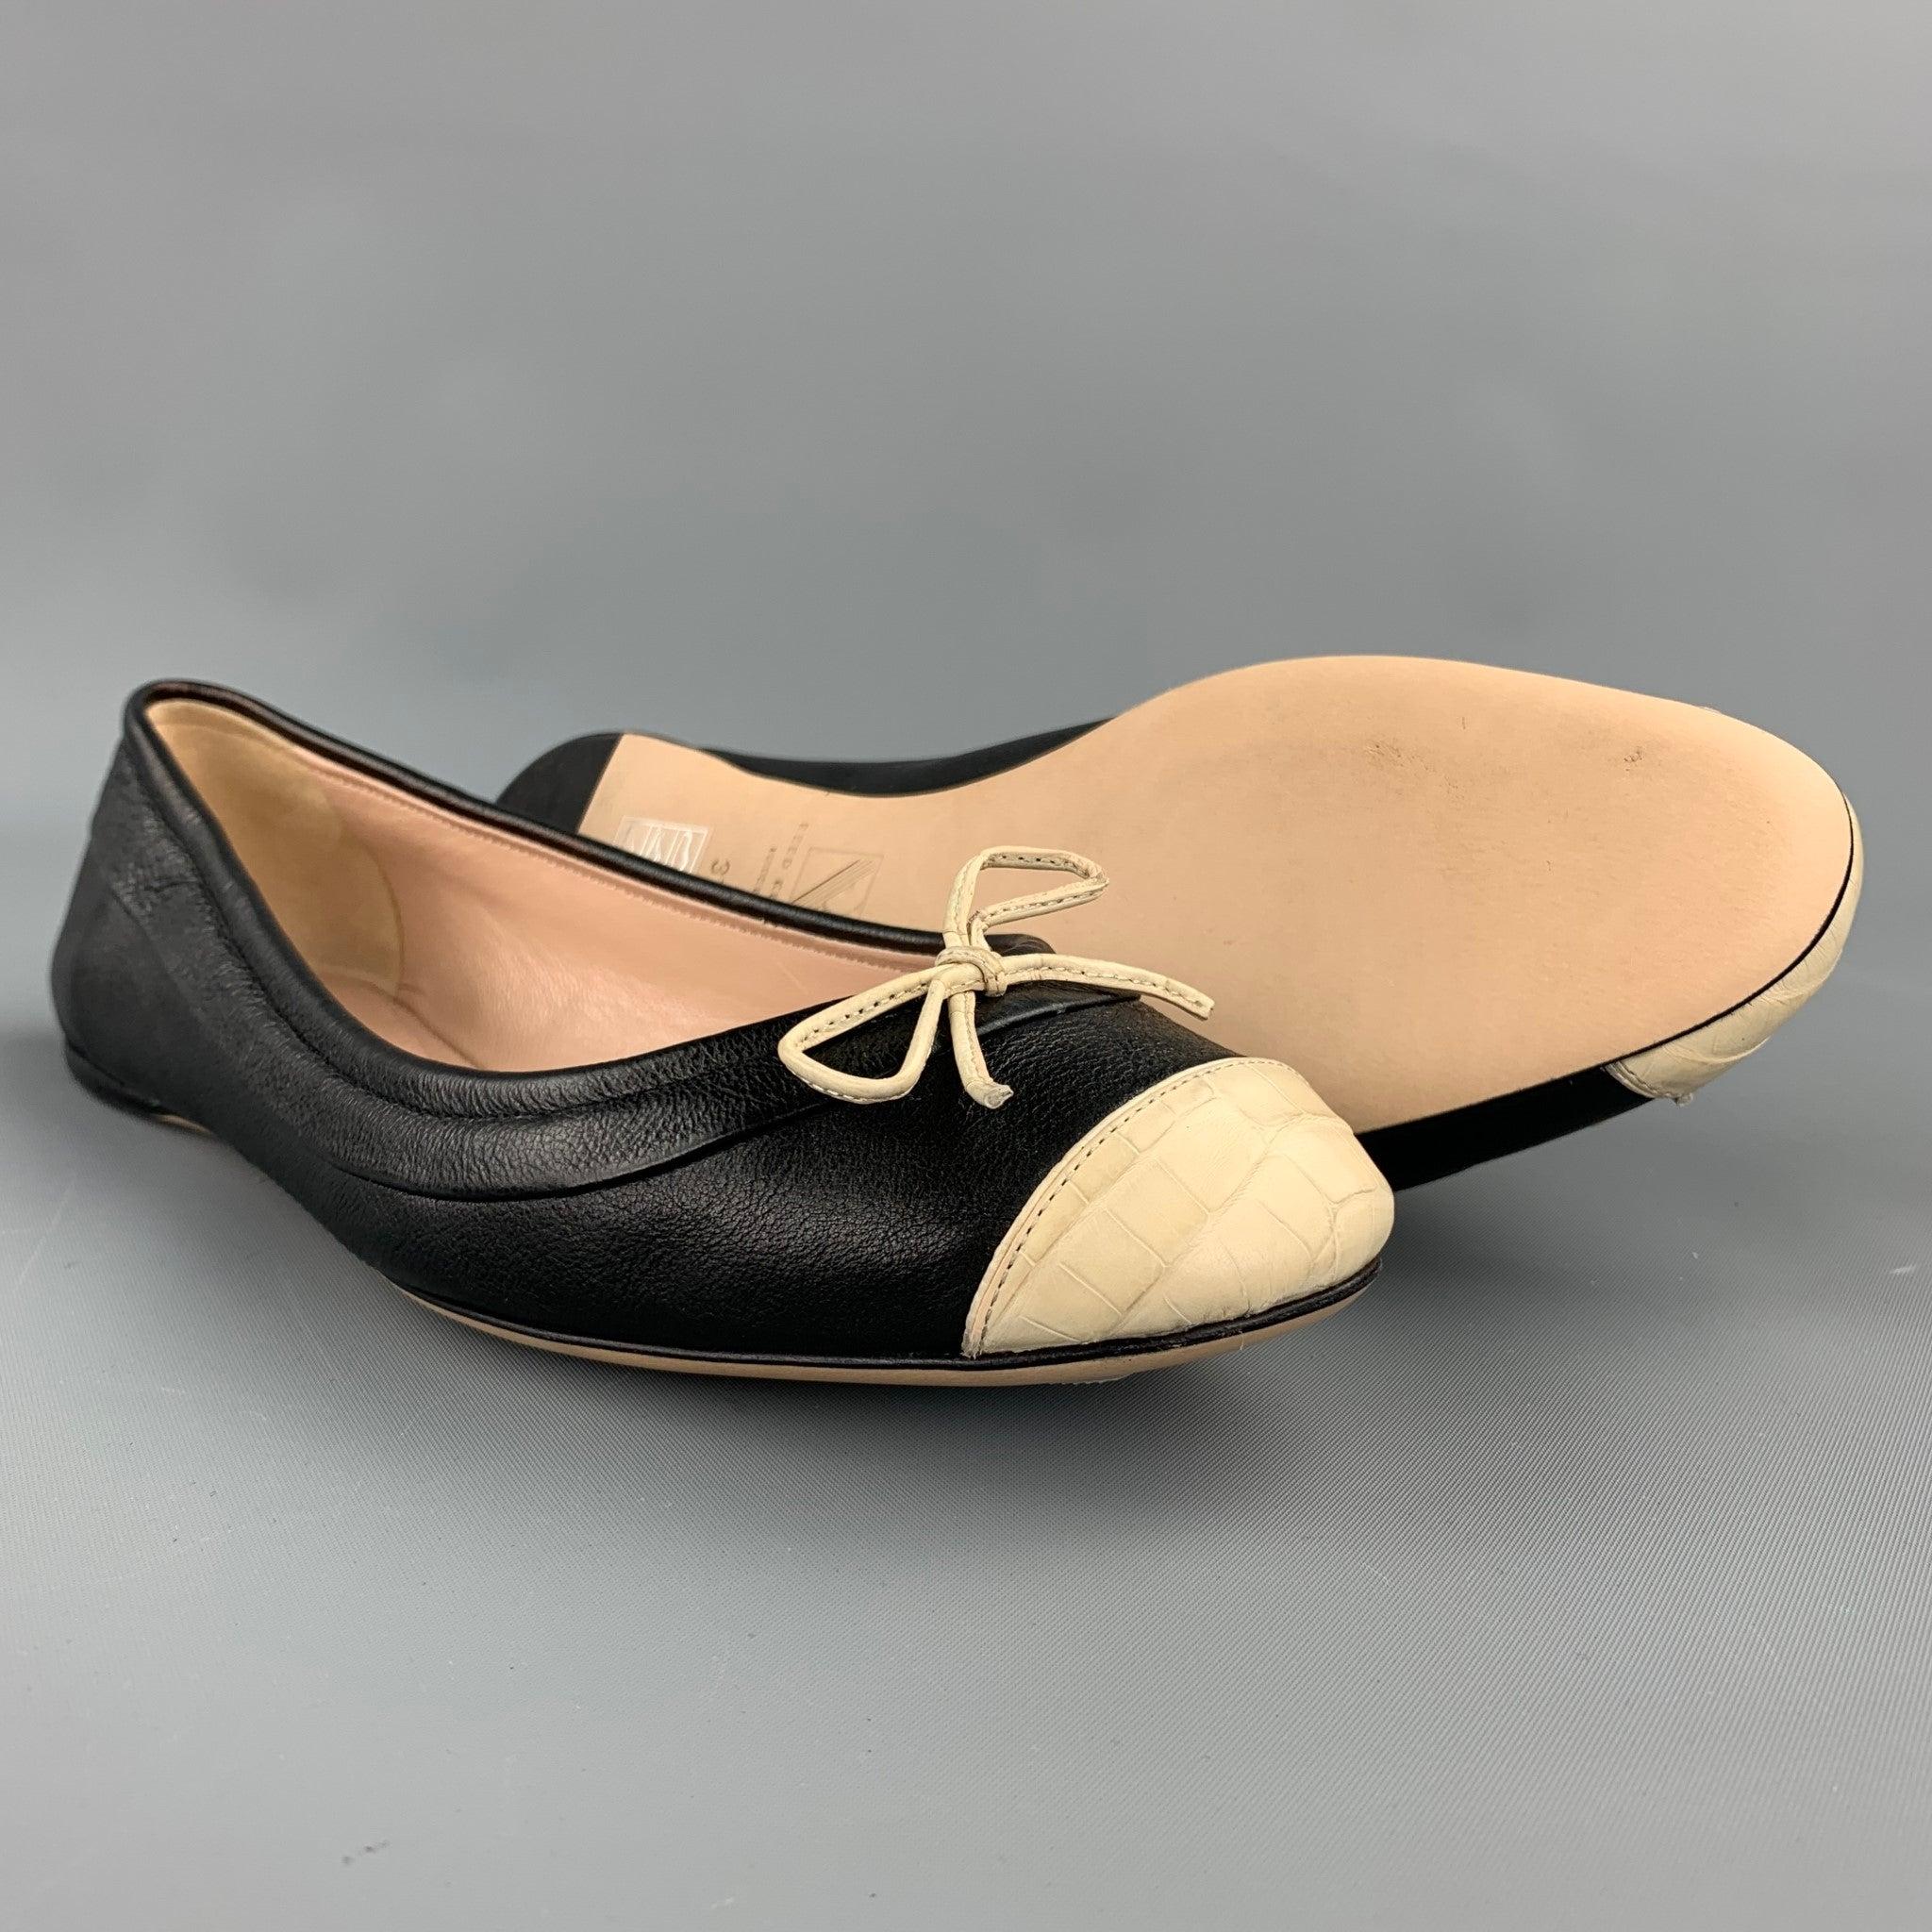 Women's REED KRAKOFF Size 7.5 Black & Beige Two Tone Leather Cap Toe Flats For Sale